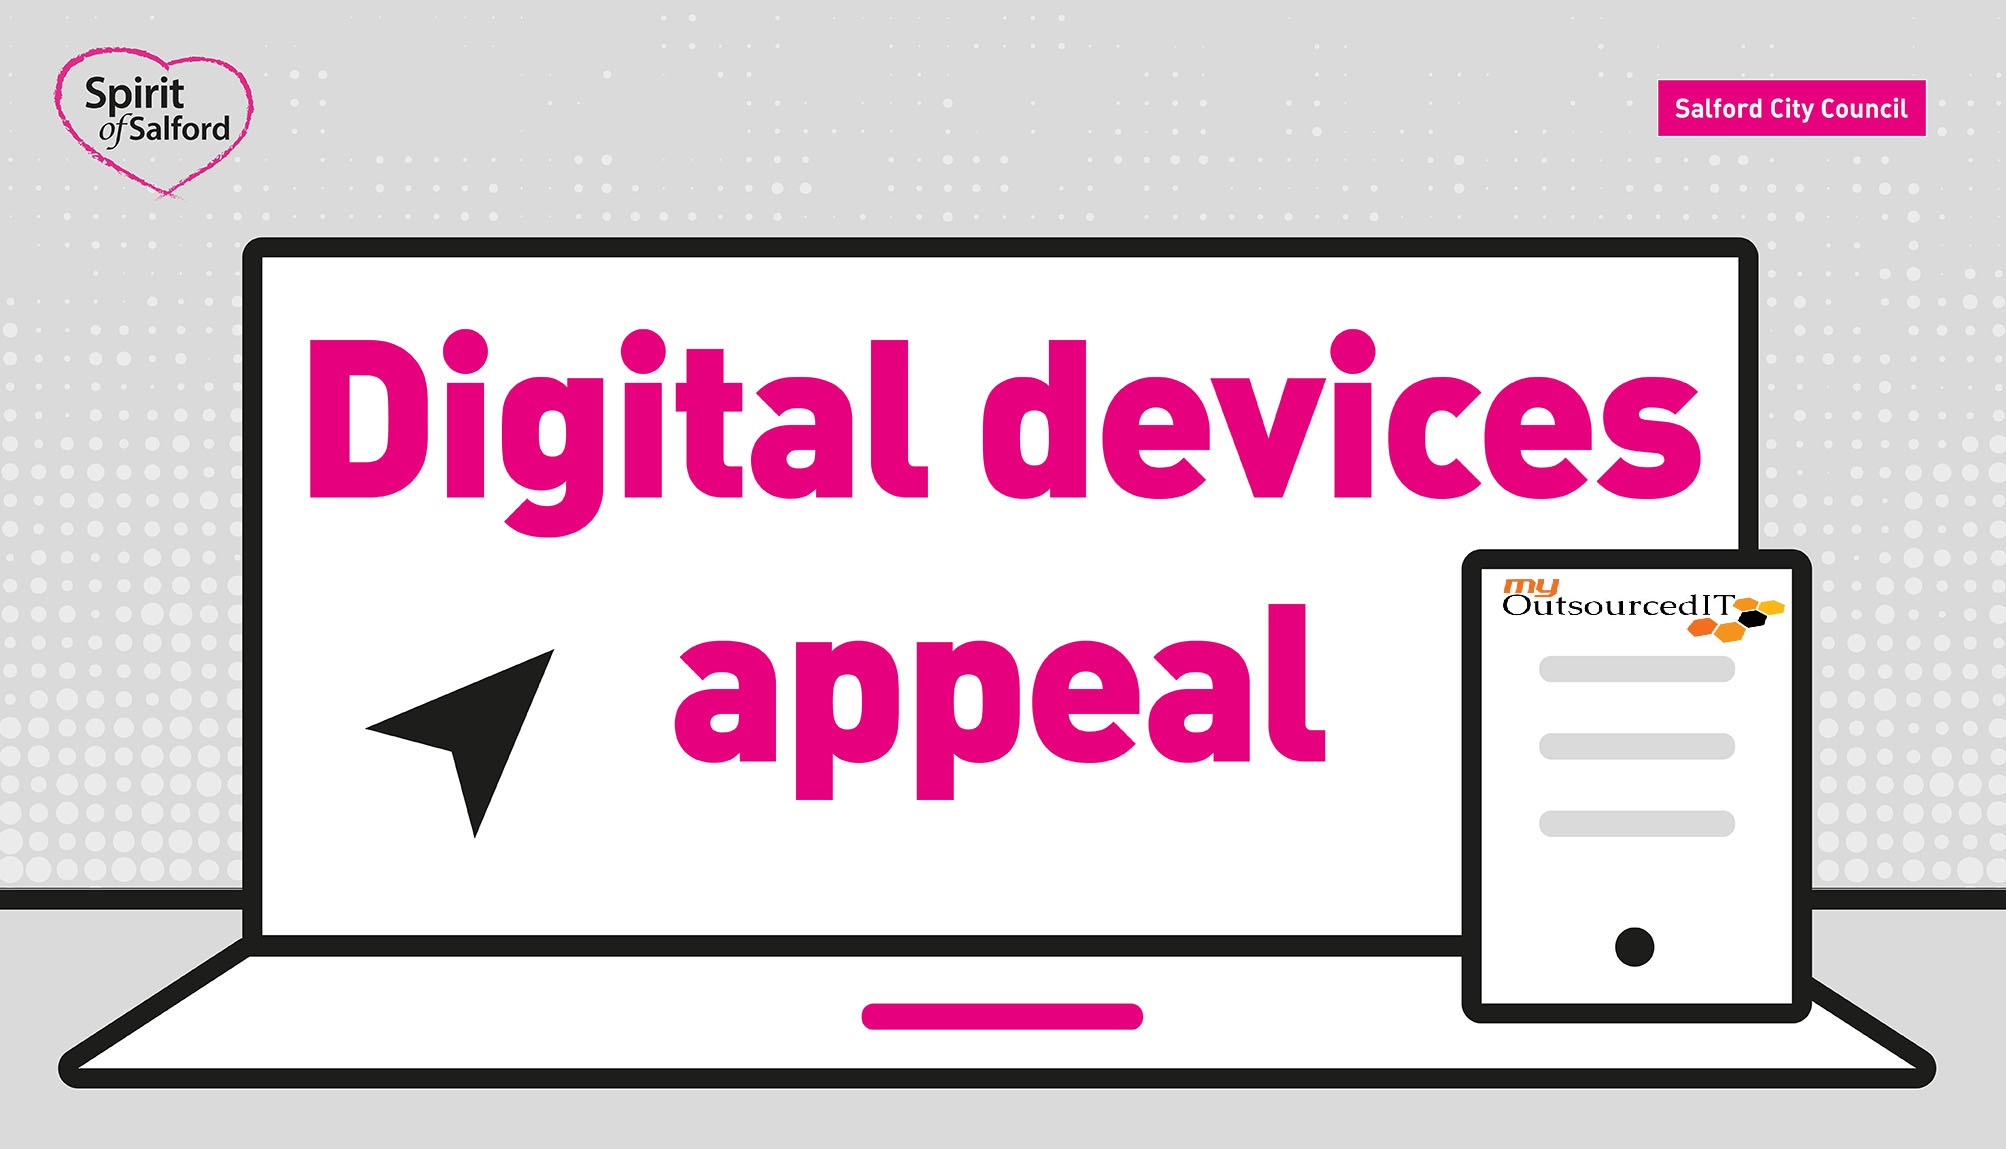 Digital devices appeal